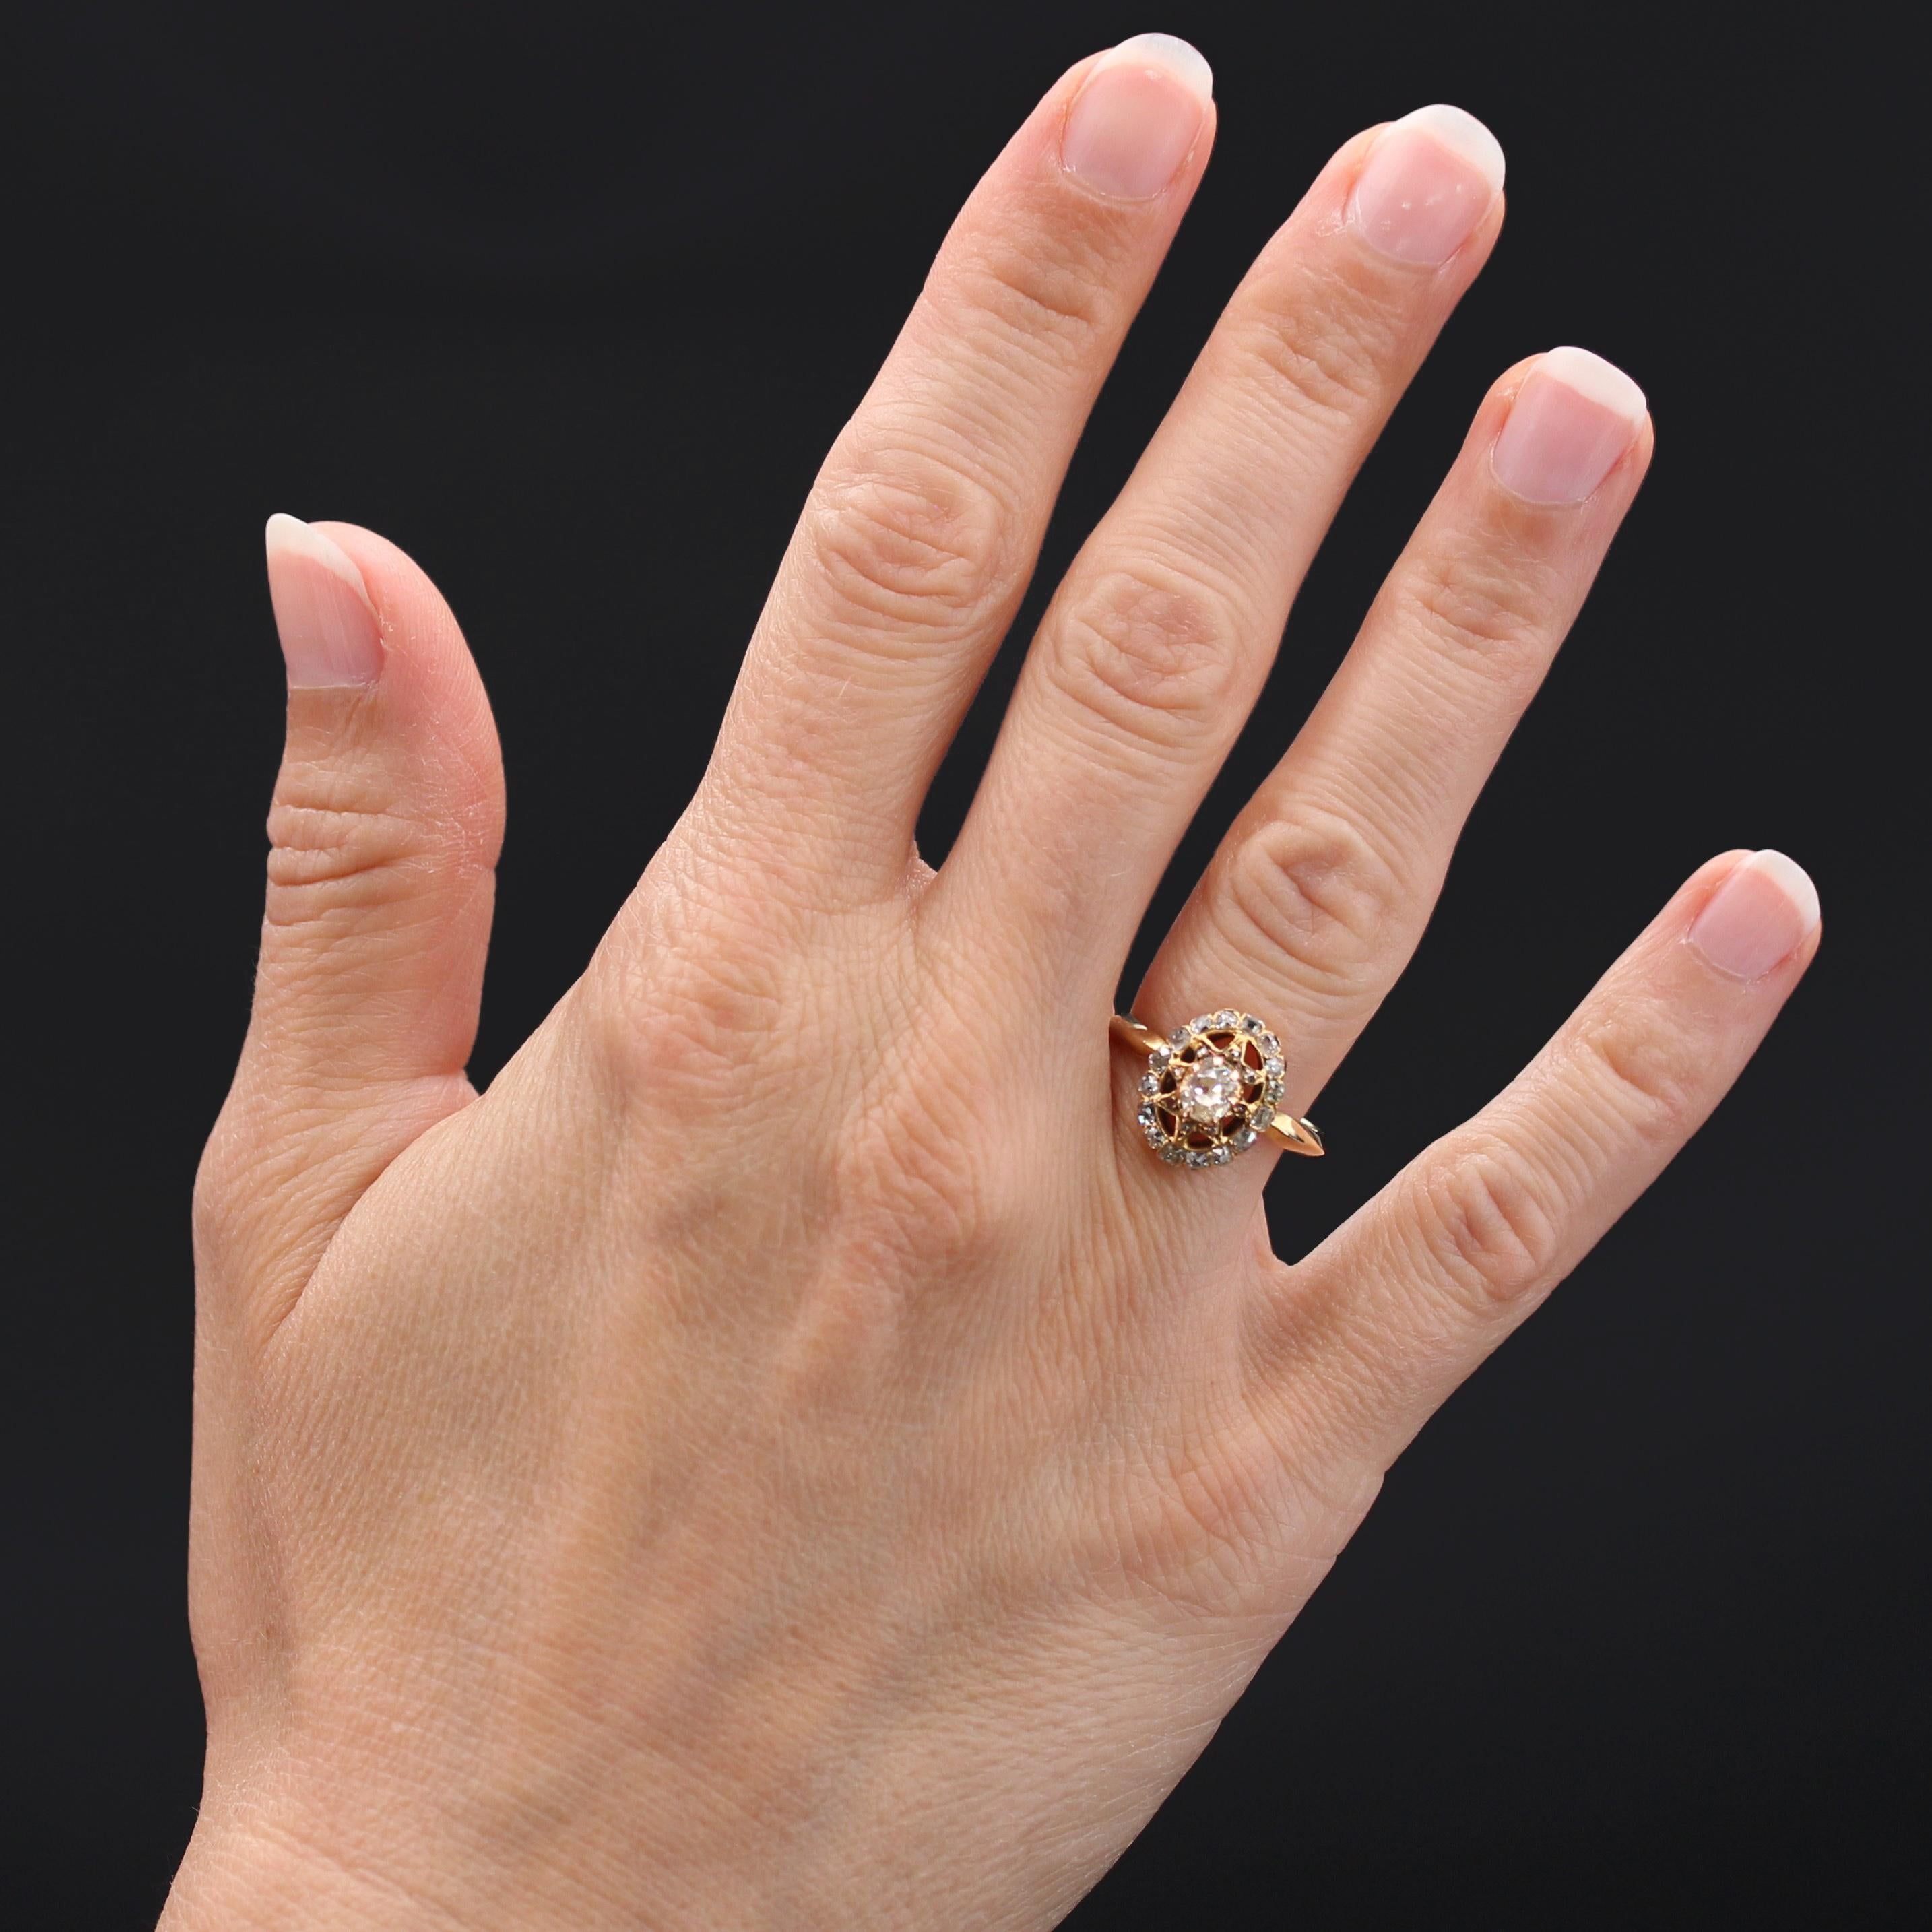 Ring in 18 karat yellow gold.
Of oval shape, this charming antique ring is decorated with claws on the top of an antique cushion-cut diamond, on a starry decoration decorated with small rose- cut. The ring is set with antique cushion-cut and